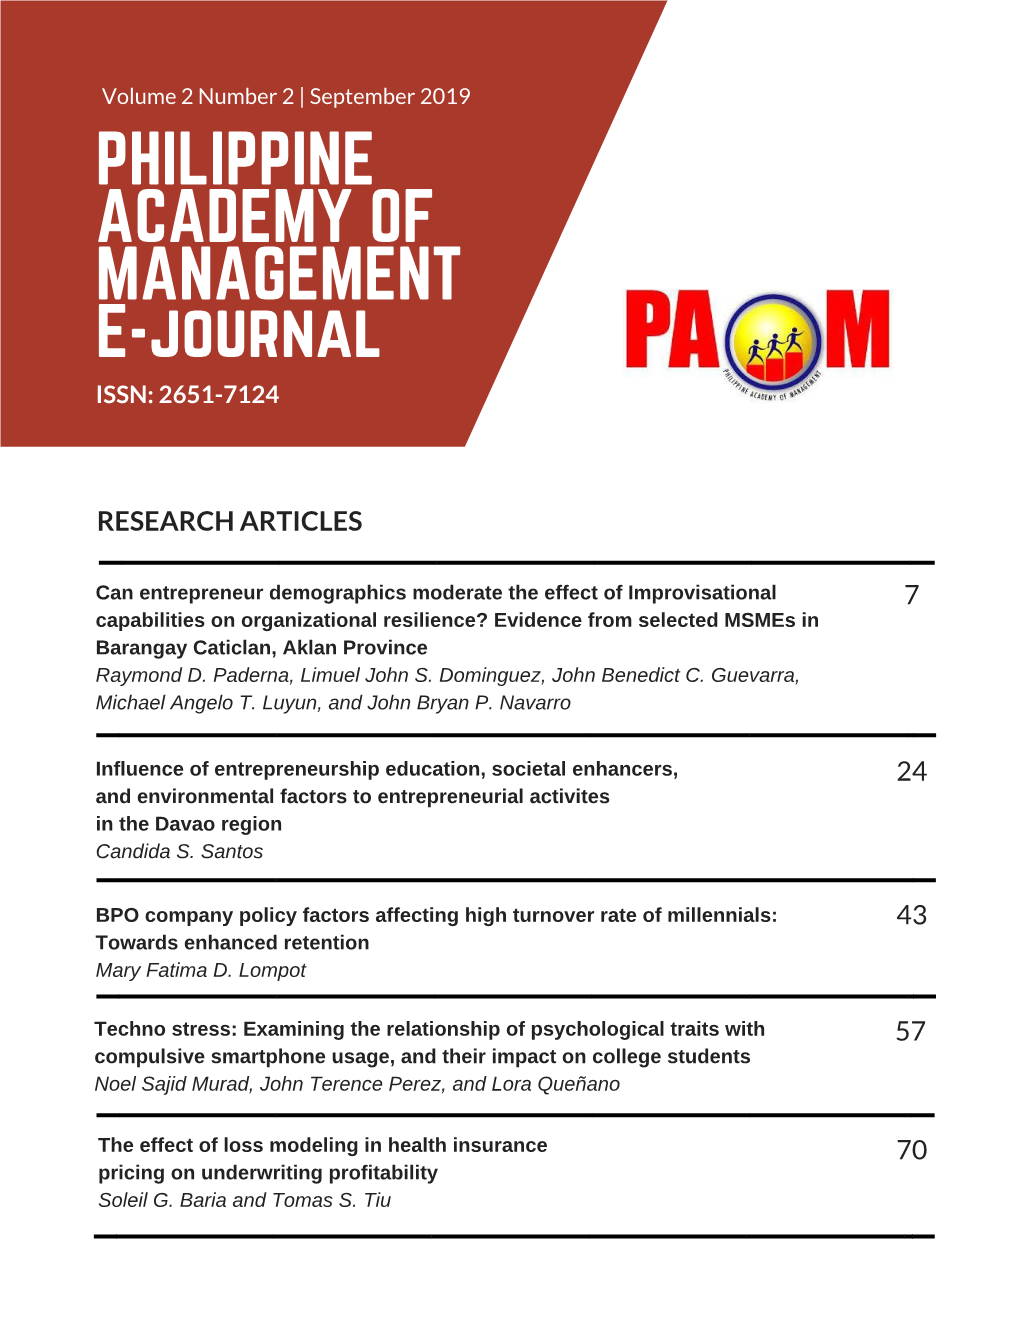 PHILIPPINE ACADEMY of MANAGEMENT E-Journal ISSN: 2651-7124